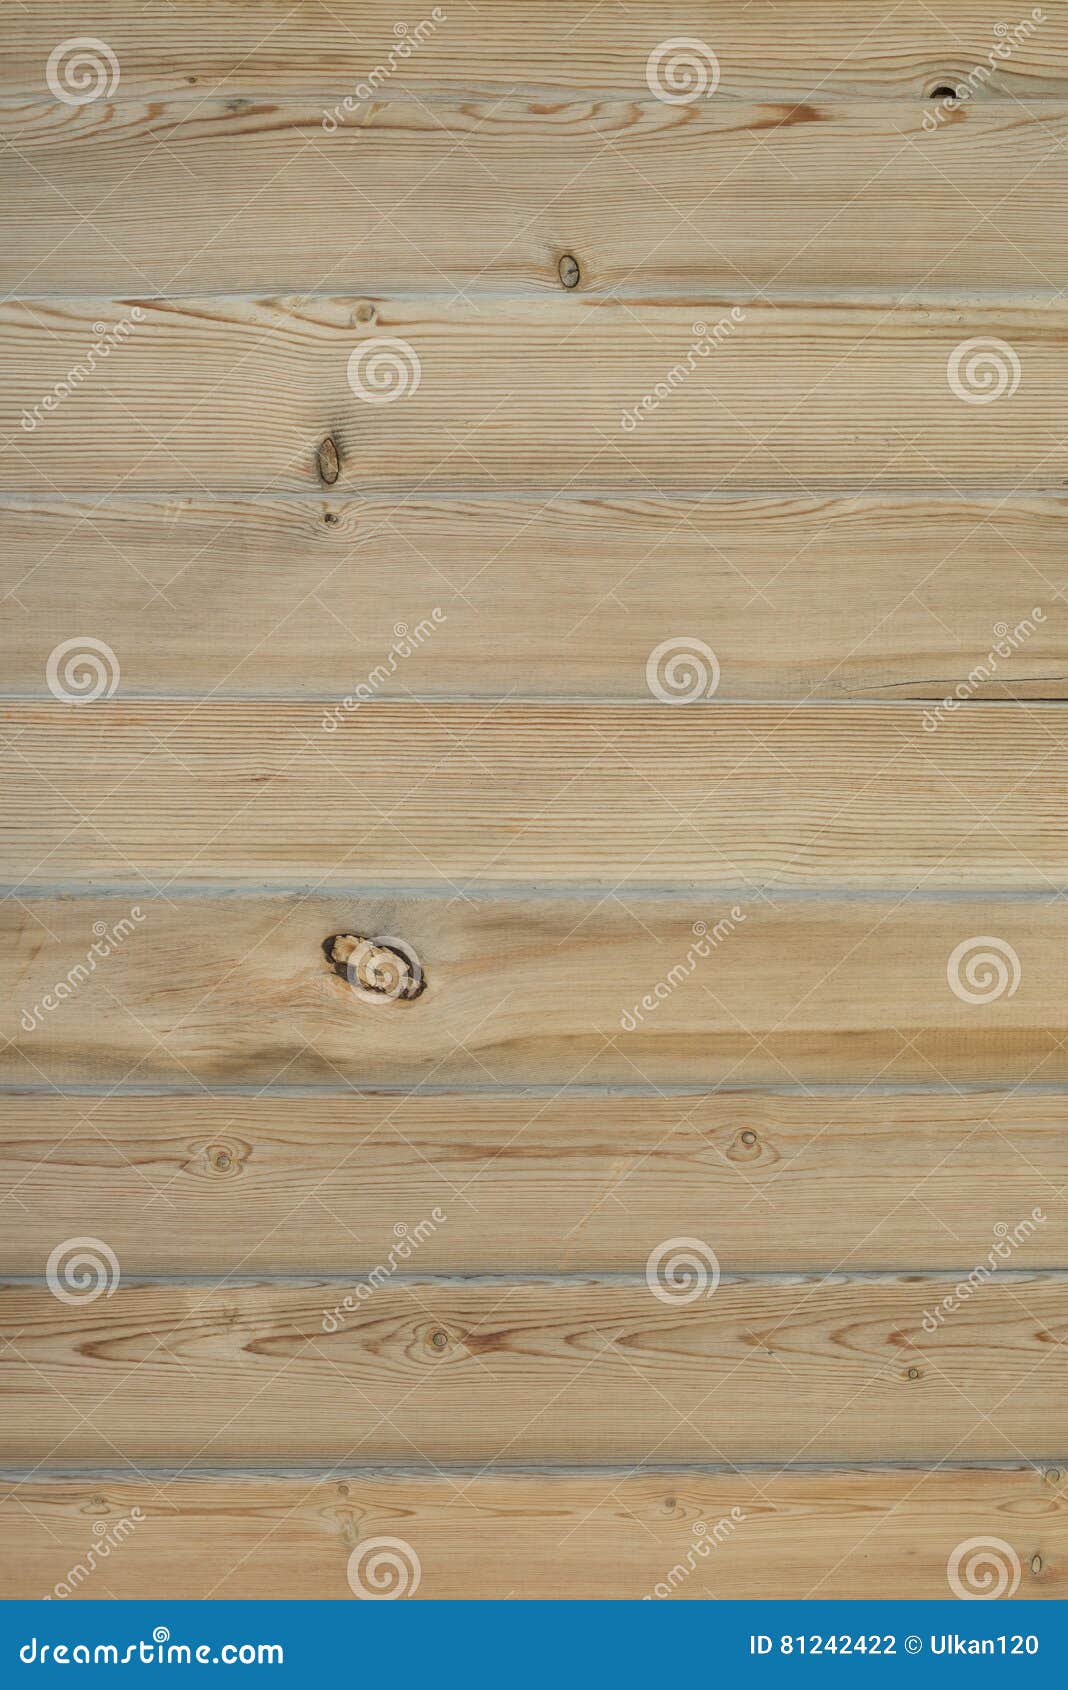 Wood Planks Kiln Dried Wooden Lumber Texture Background